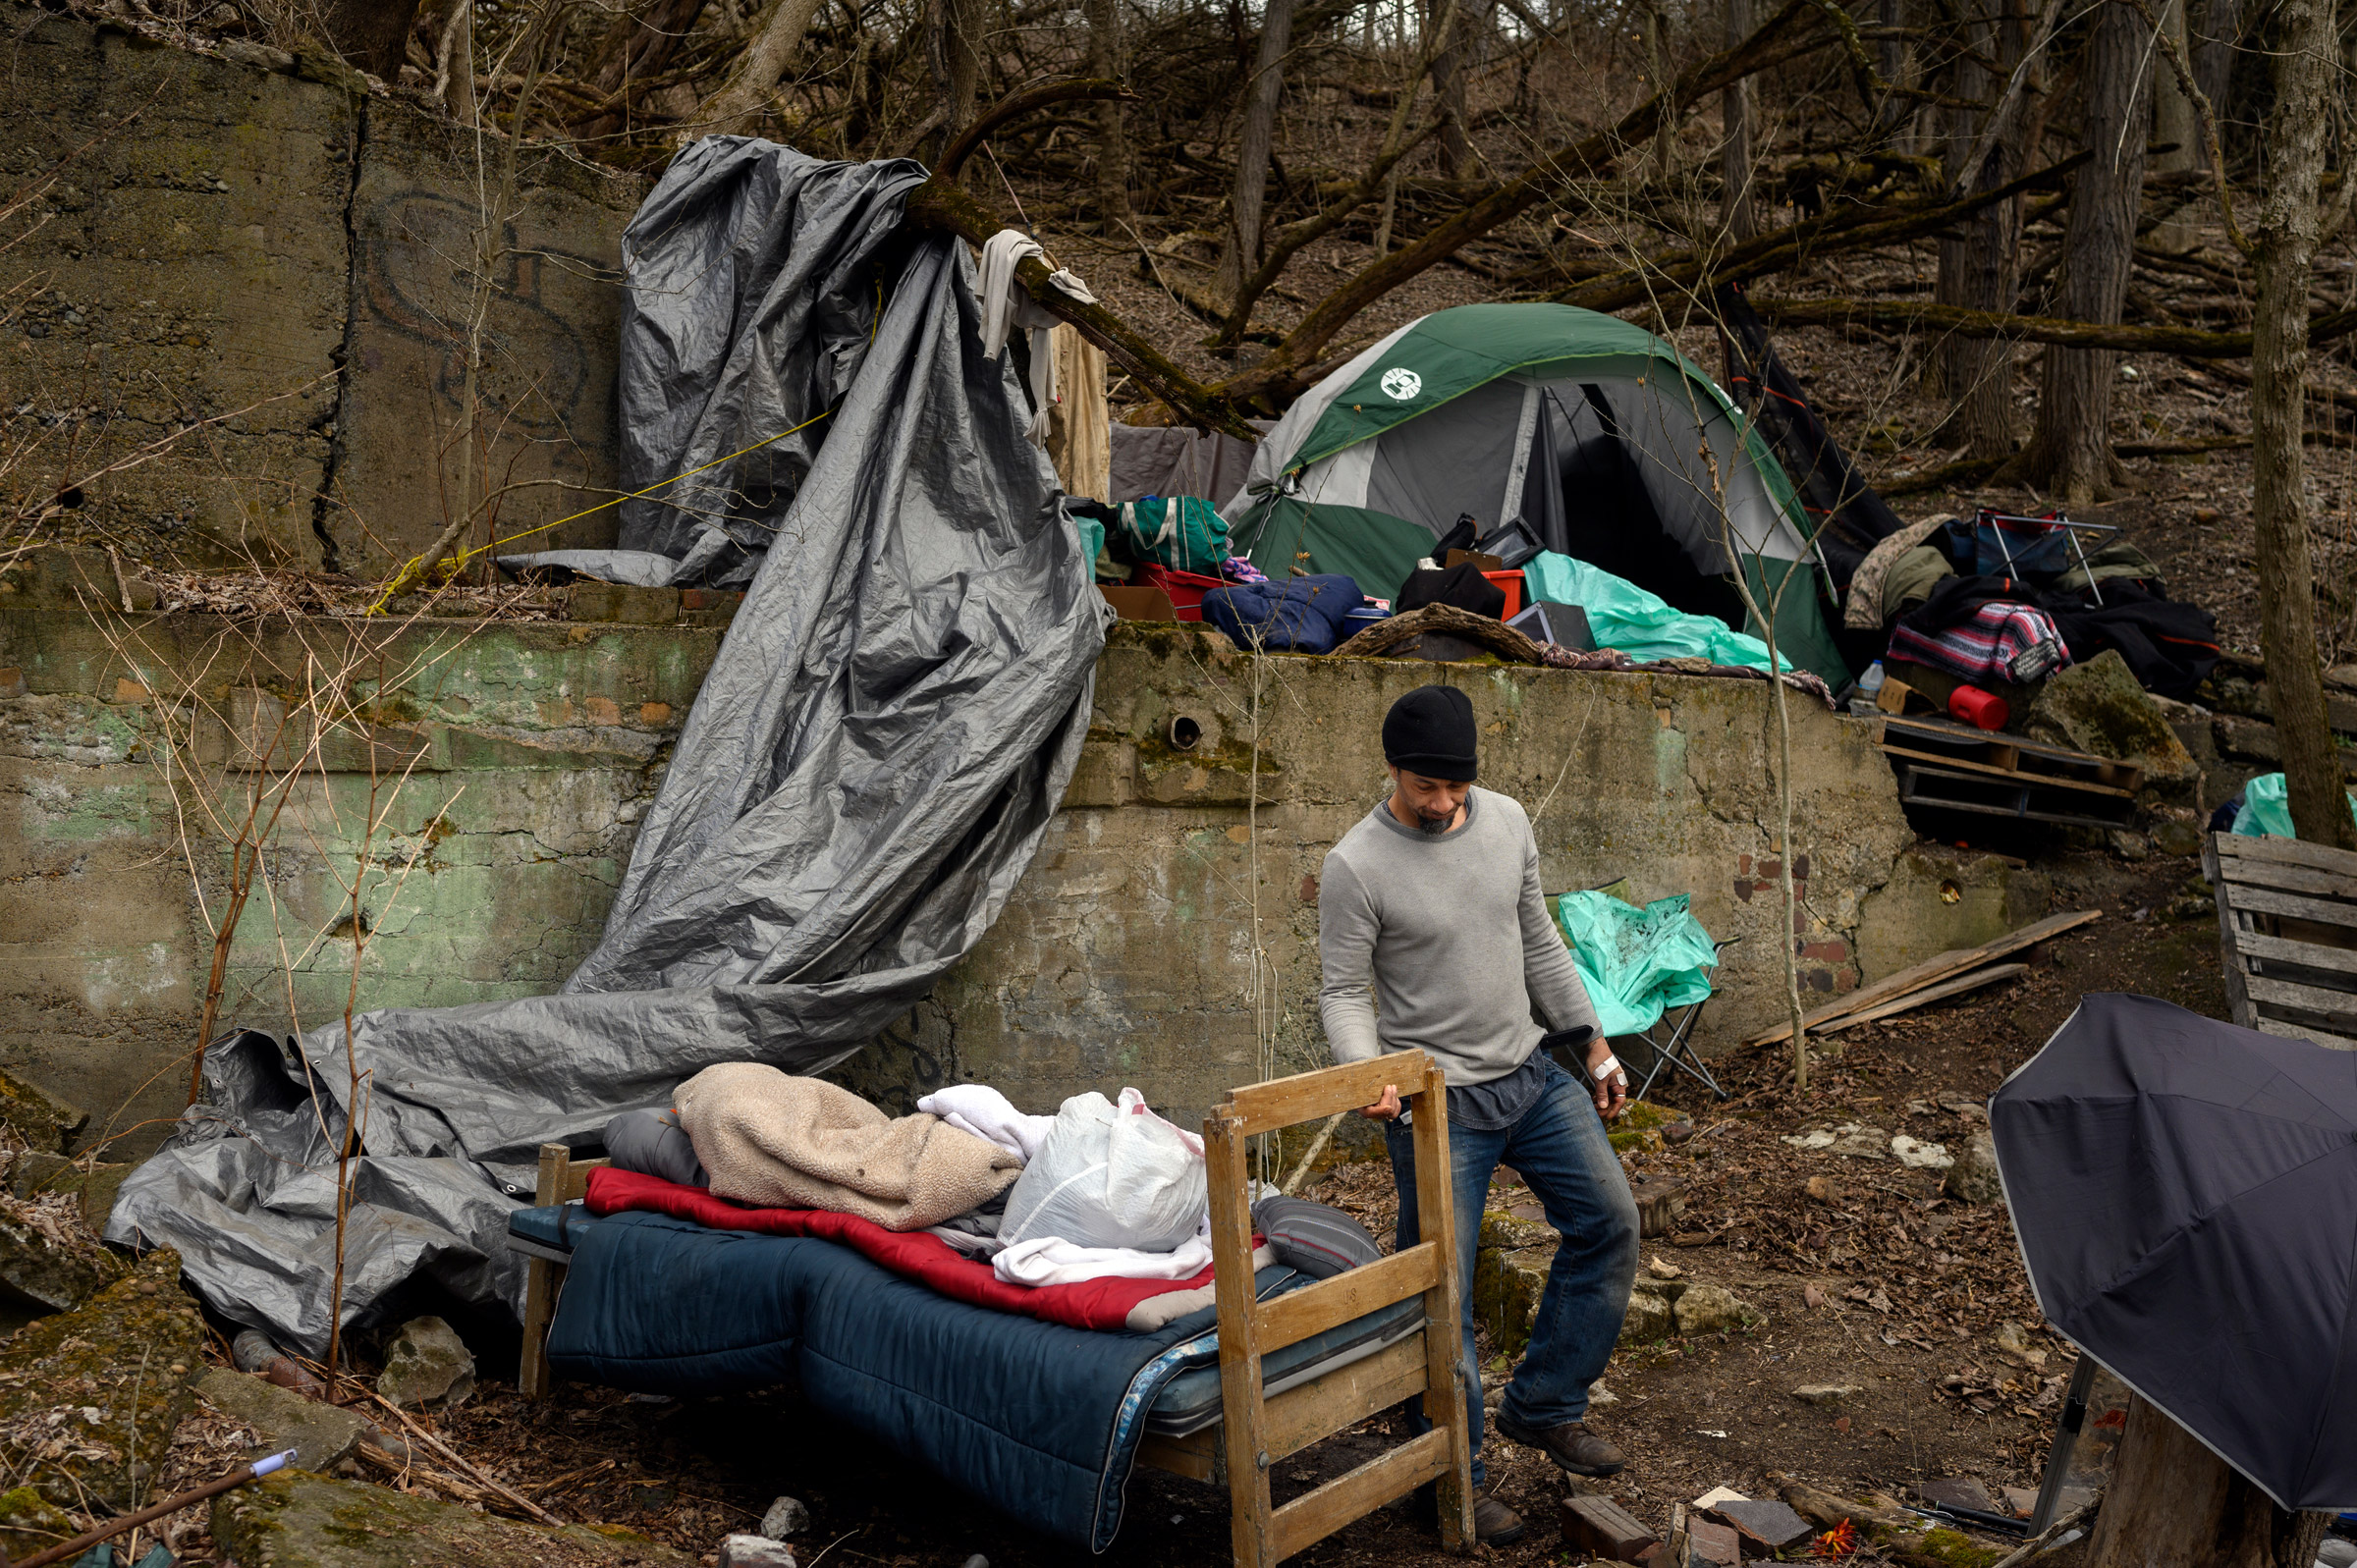 After the closure of a temporary winter shelter, the unhoused prepare to live outside for the next nine months starting on March 16. (Rebecca Kiger for TIME)